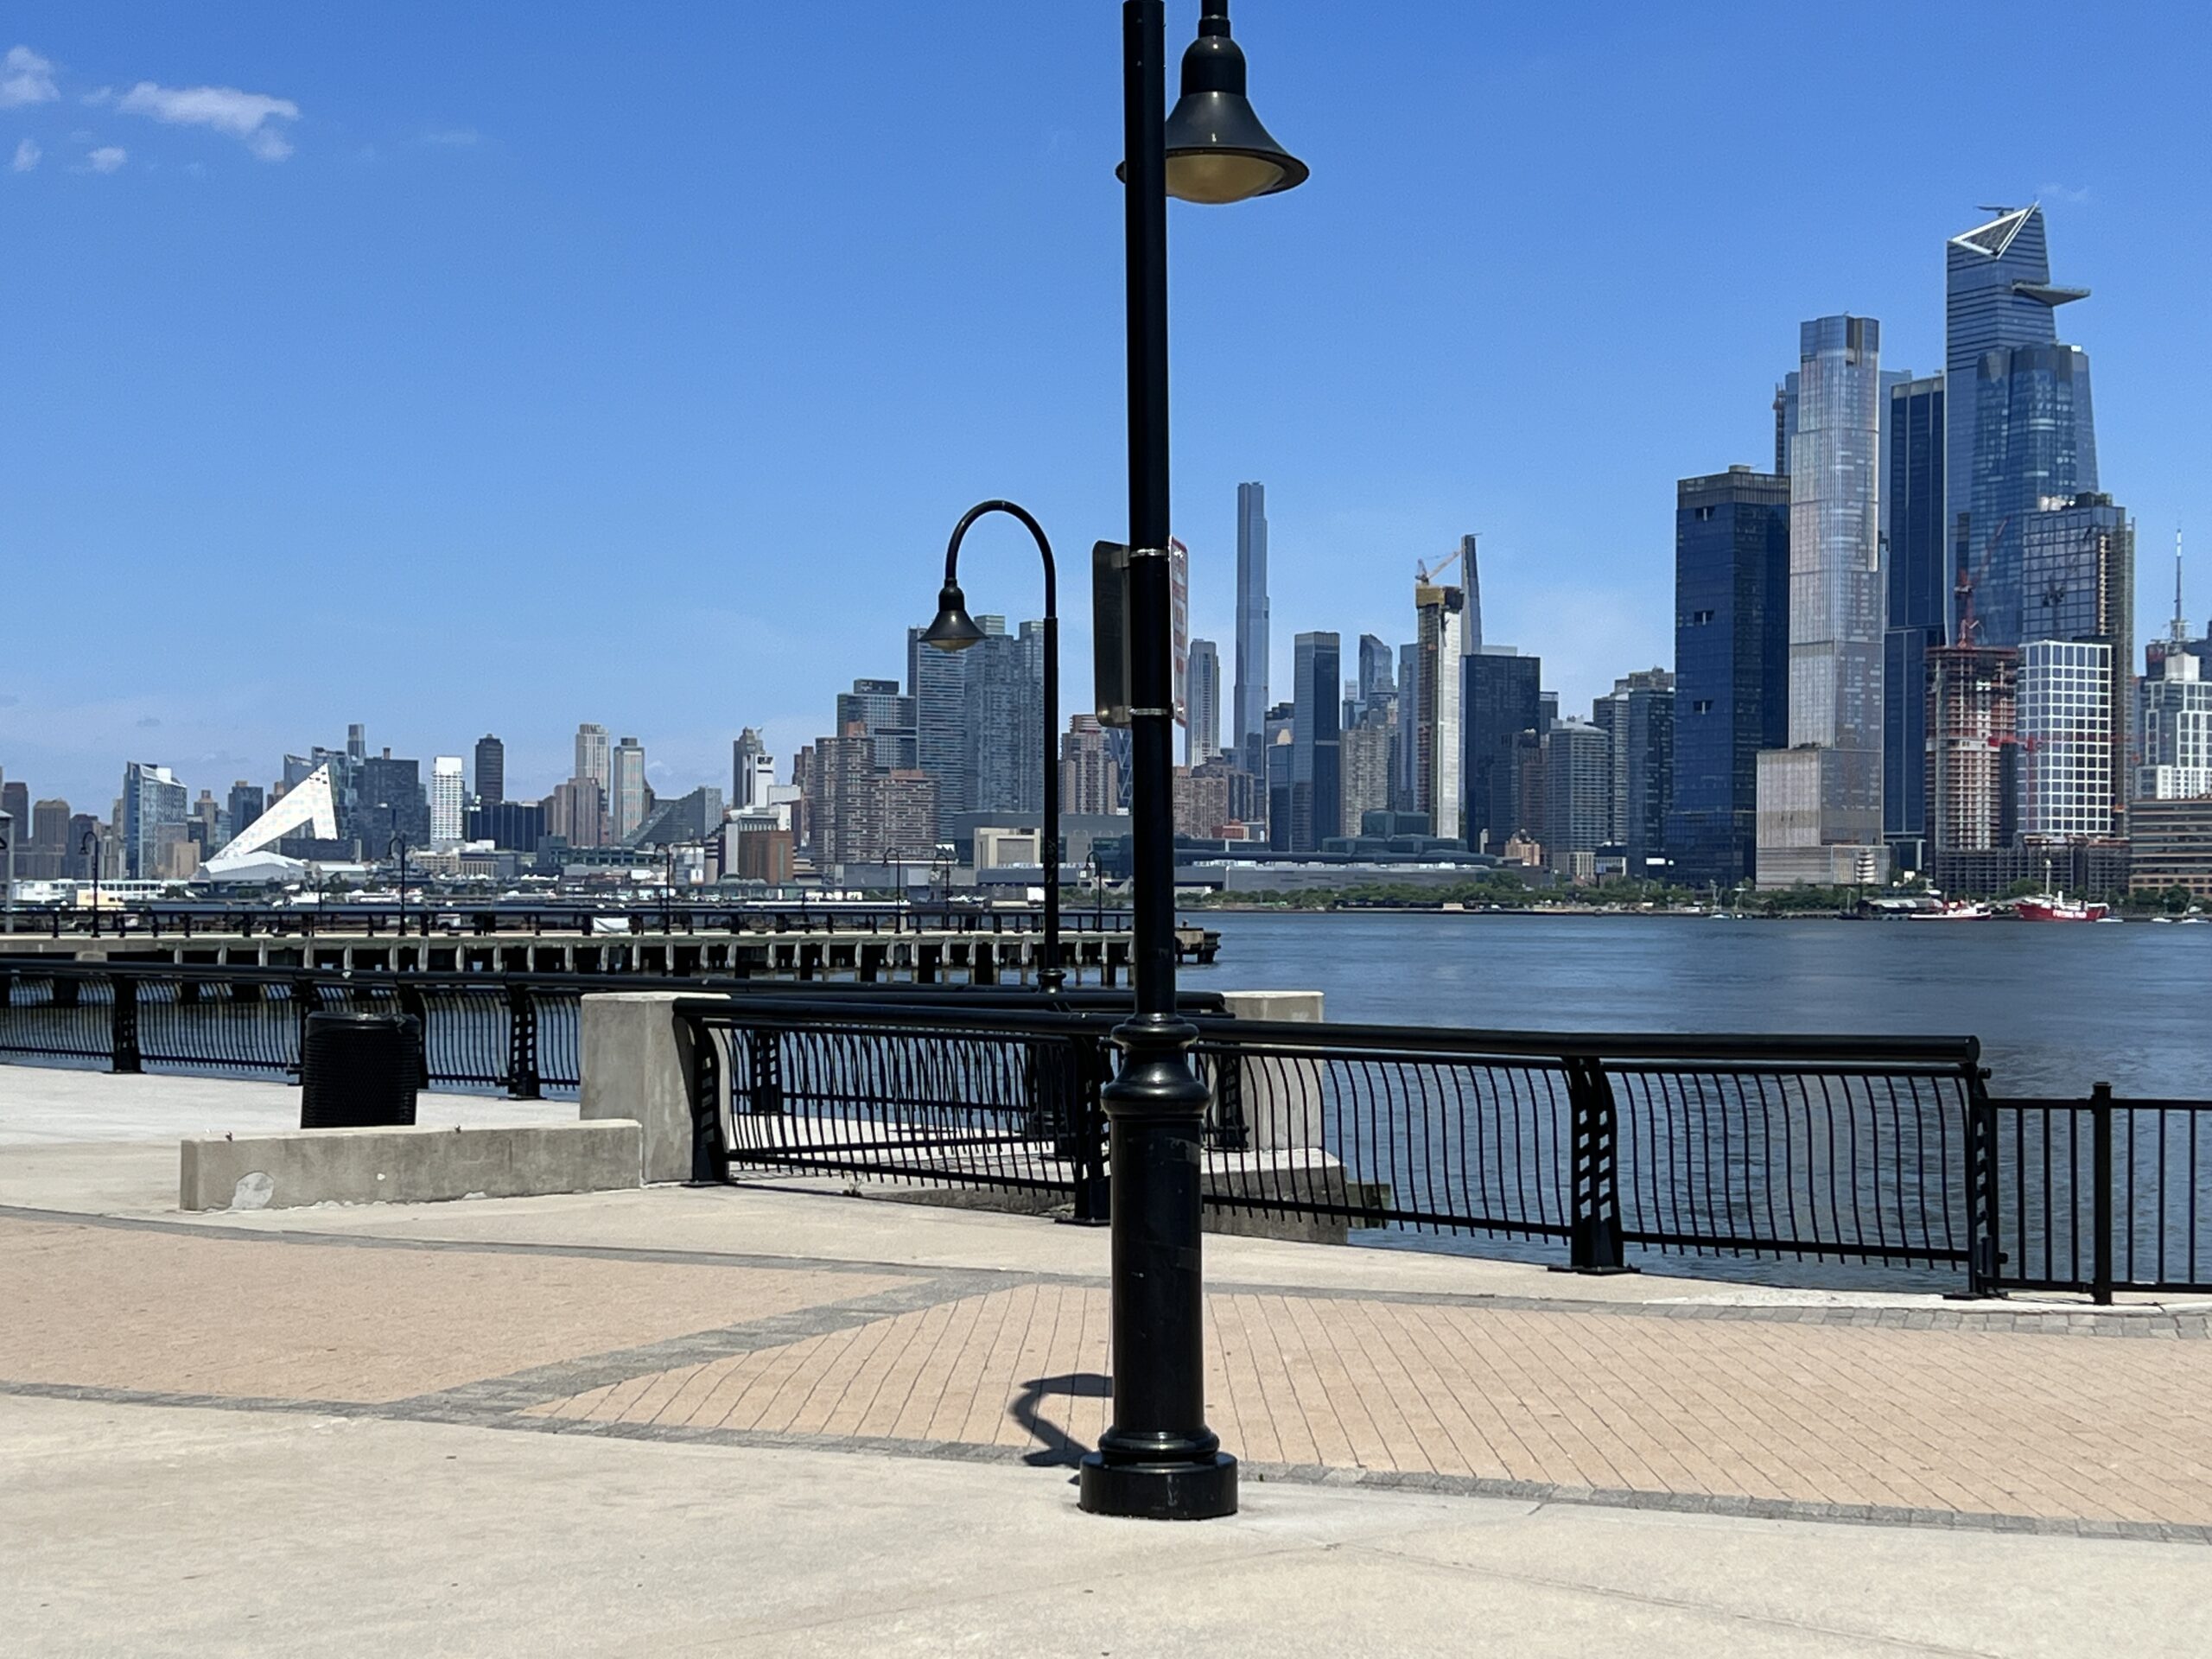 Maxwell Place Park in Hoboken NJ - Waterfront Walkway close up WIDE image